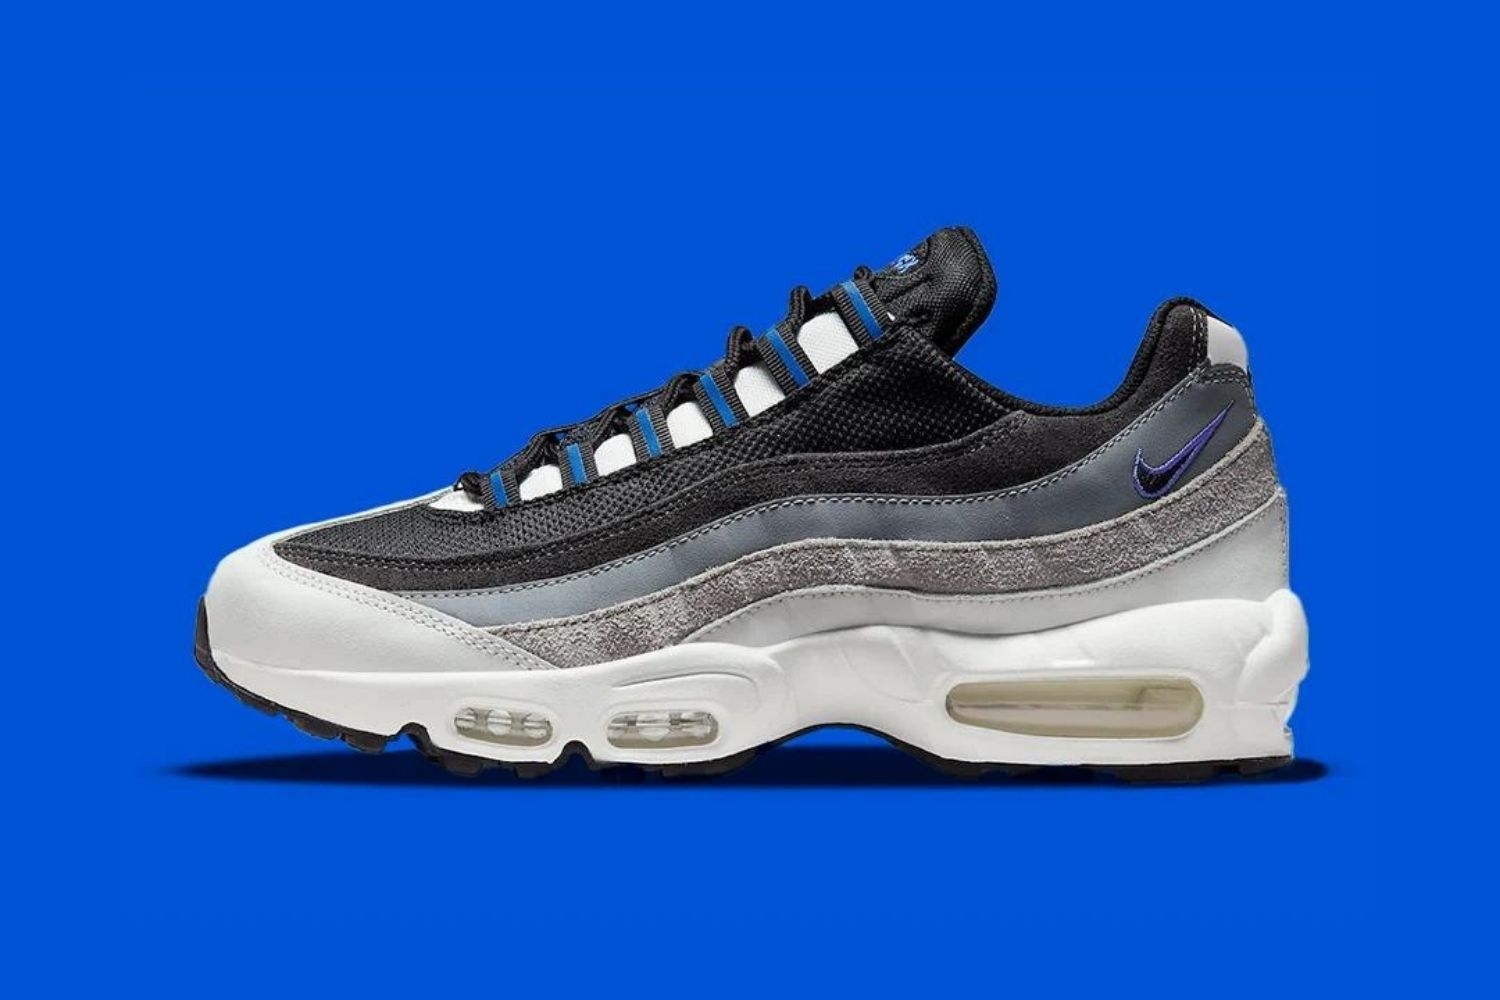 Ready for Winter with the new Nike Air Max 95